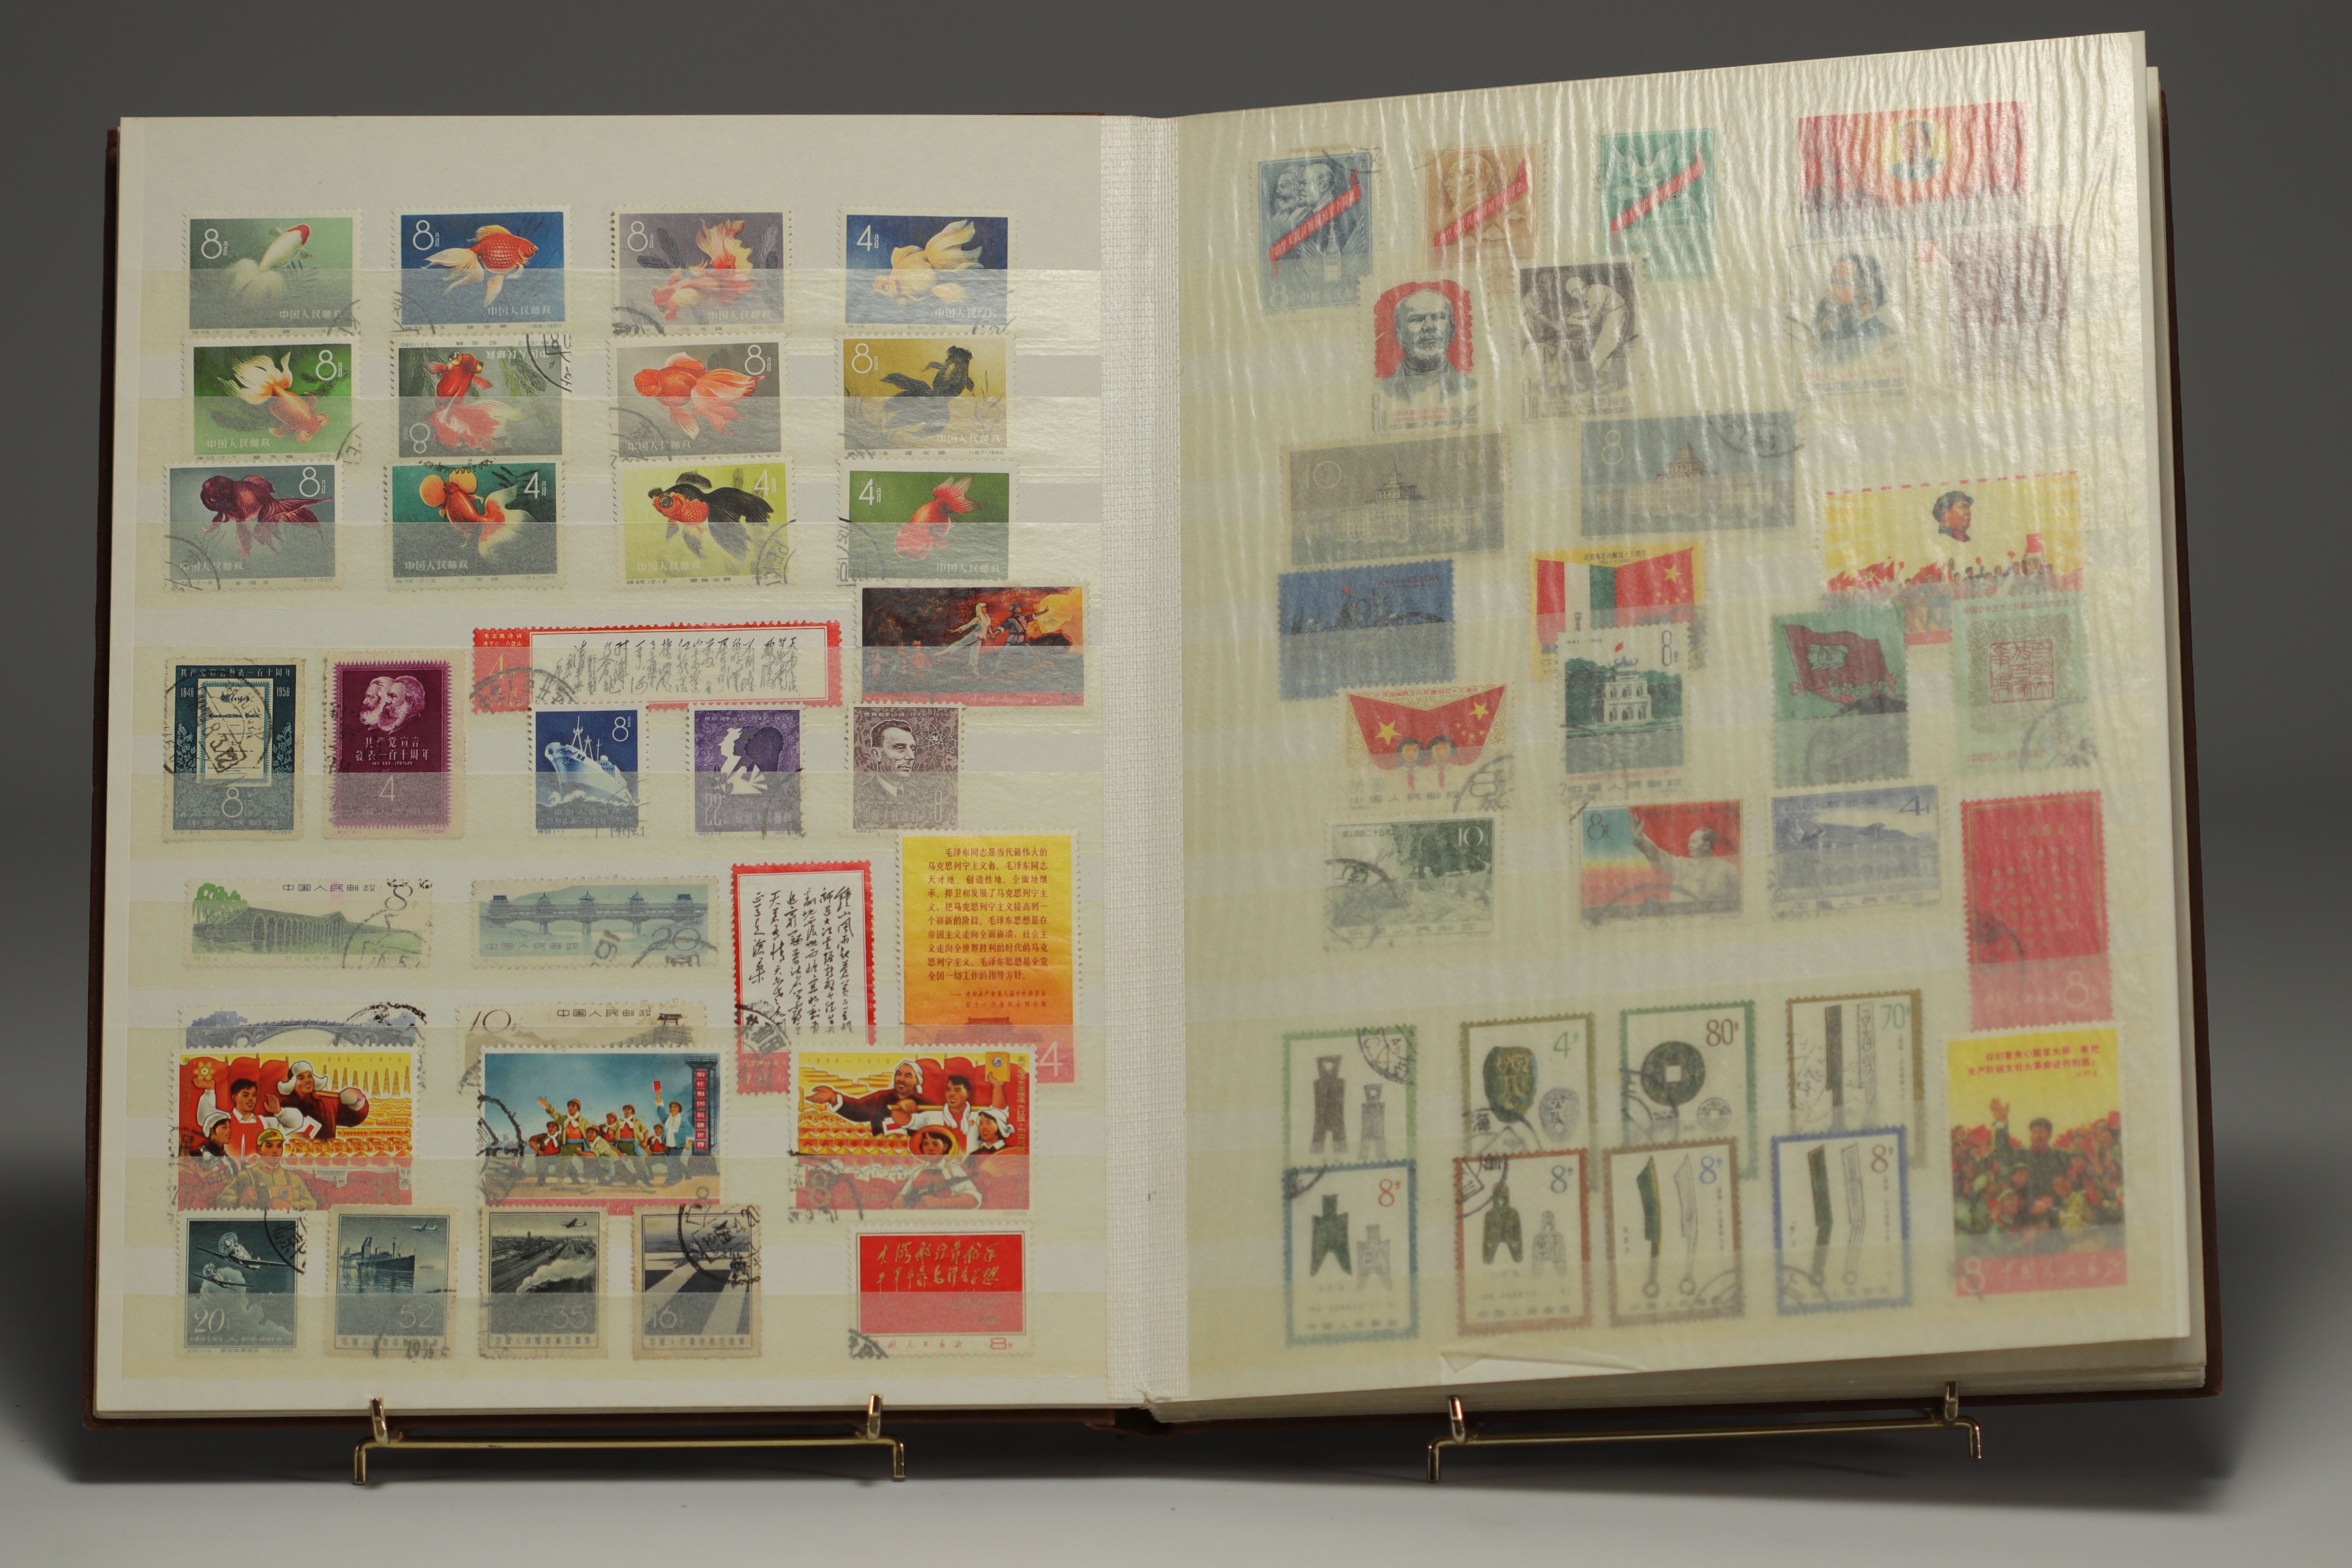 Set of 30 albums of world stamps, China, Japan, Middle East, Europe, etc. (Lot 2) - Image 22 of 22